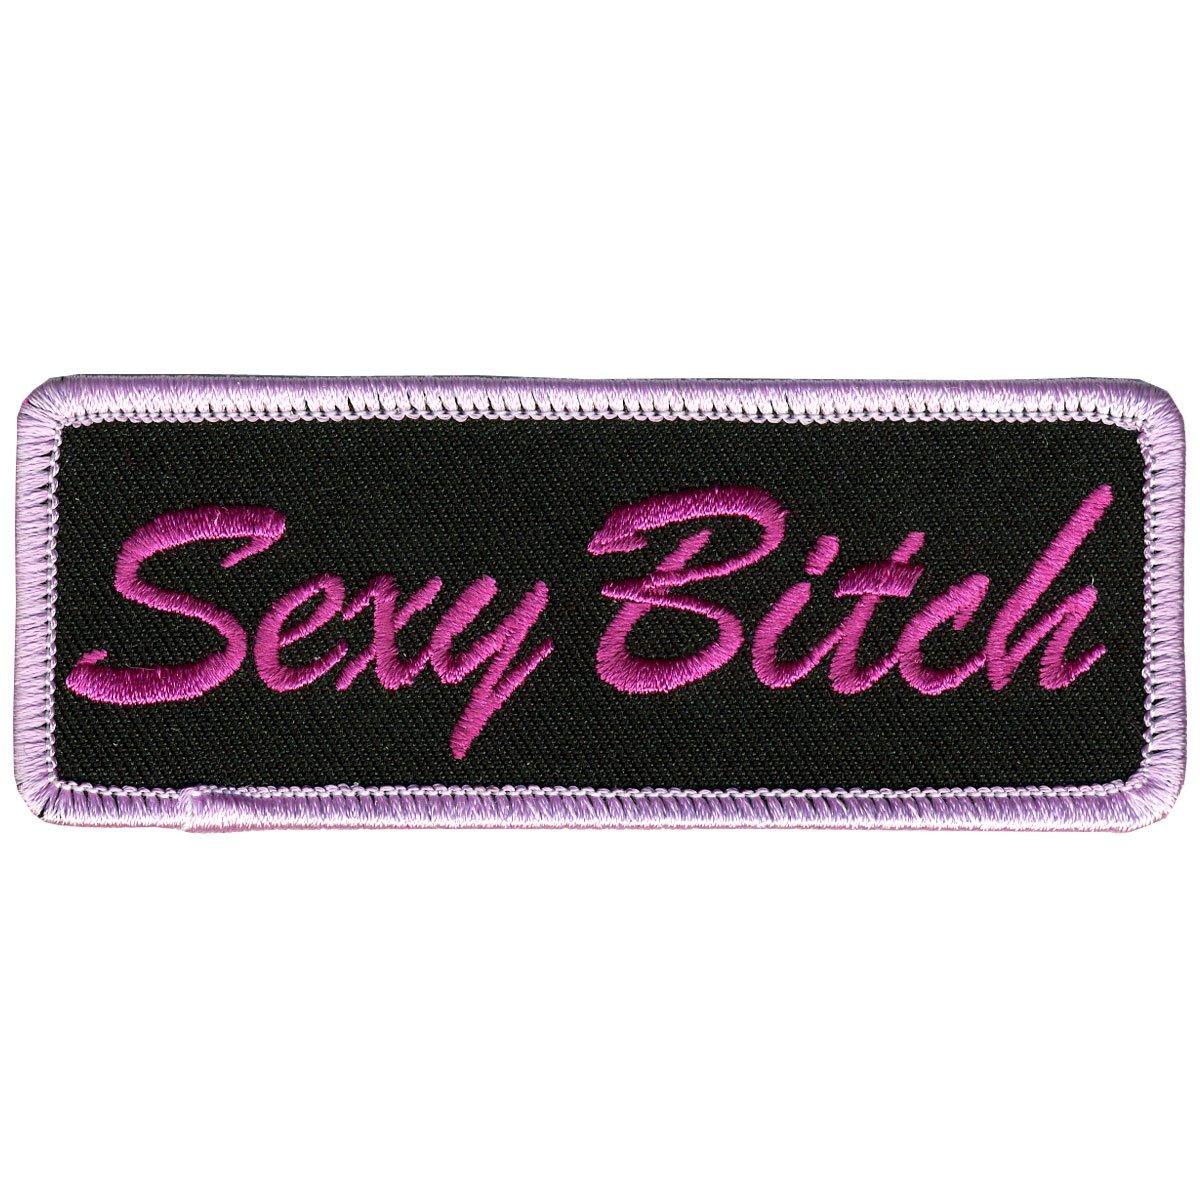 Hot Leathers Sexy Bitch 4" X 2" Patch - American Legend Rider